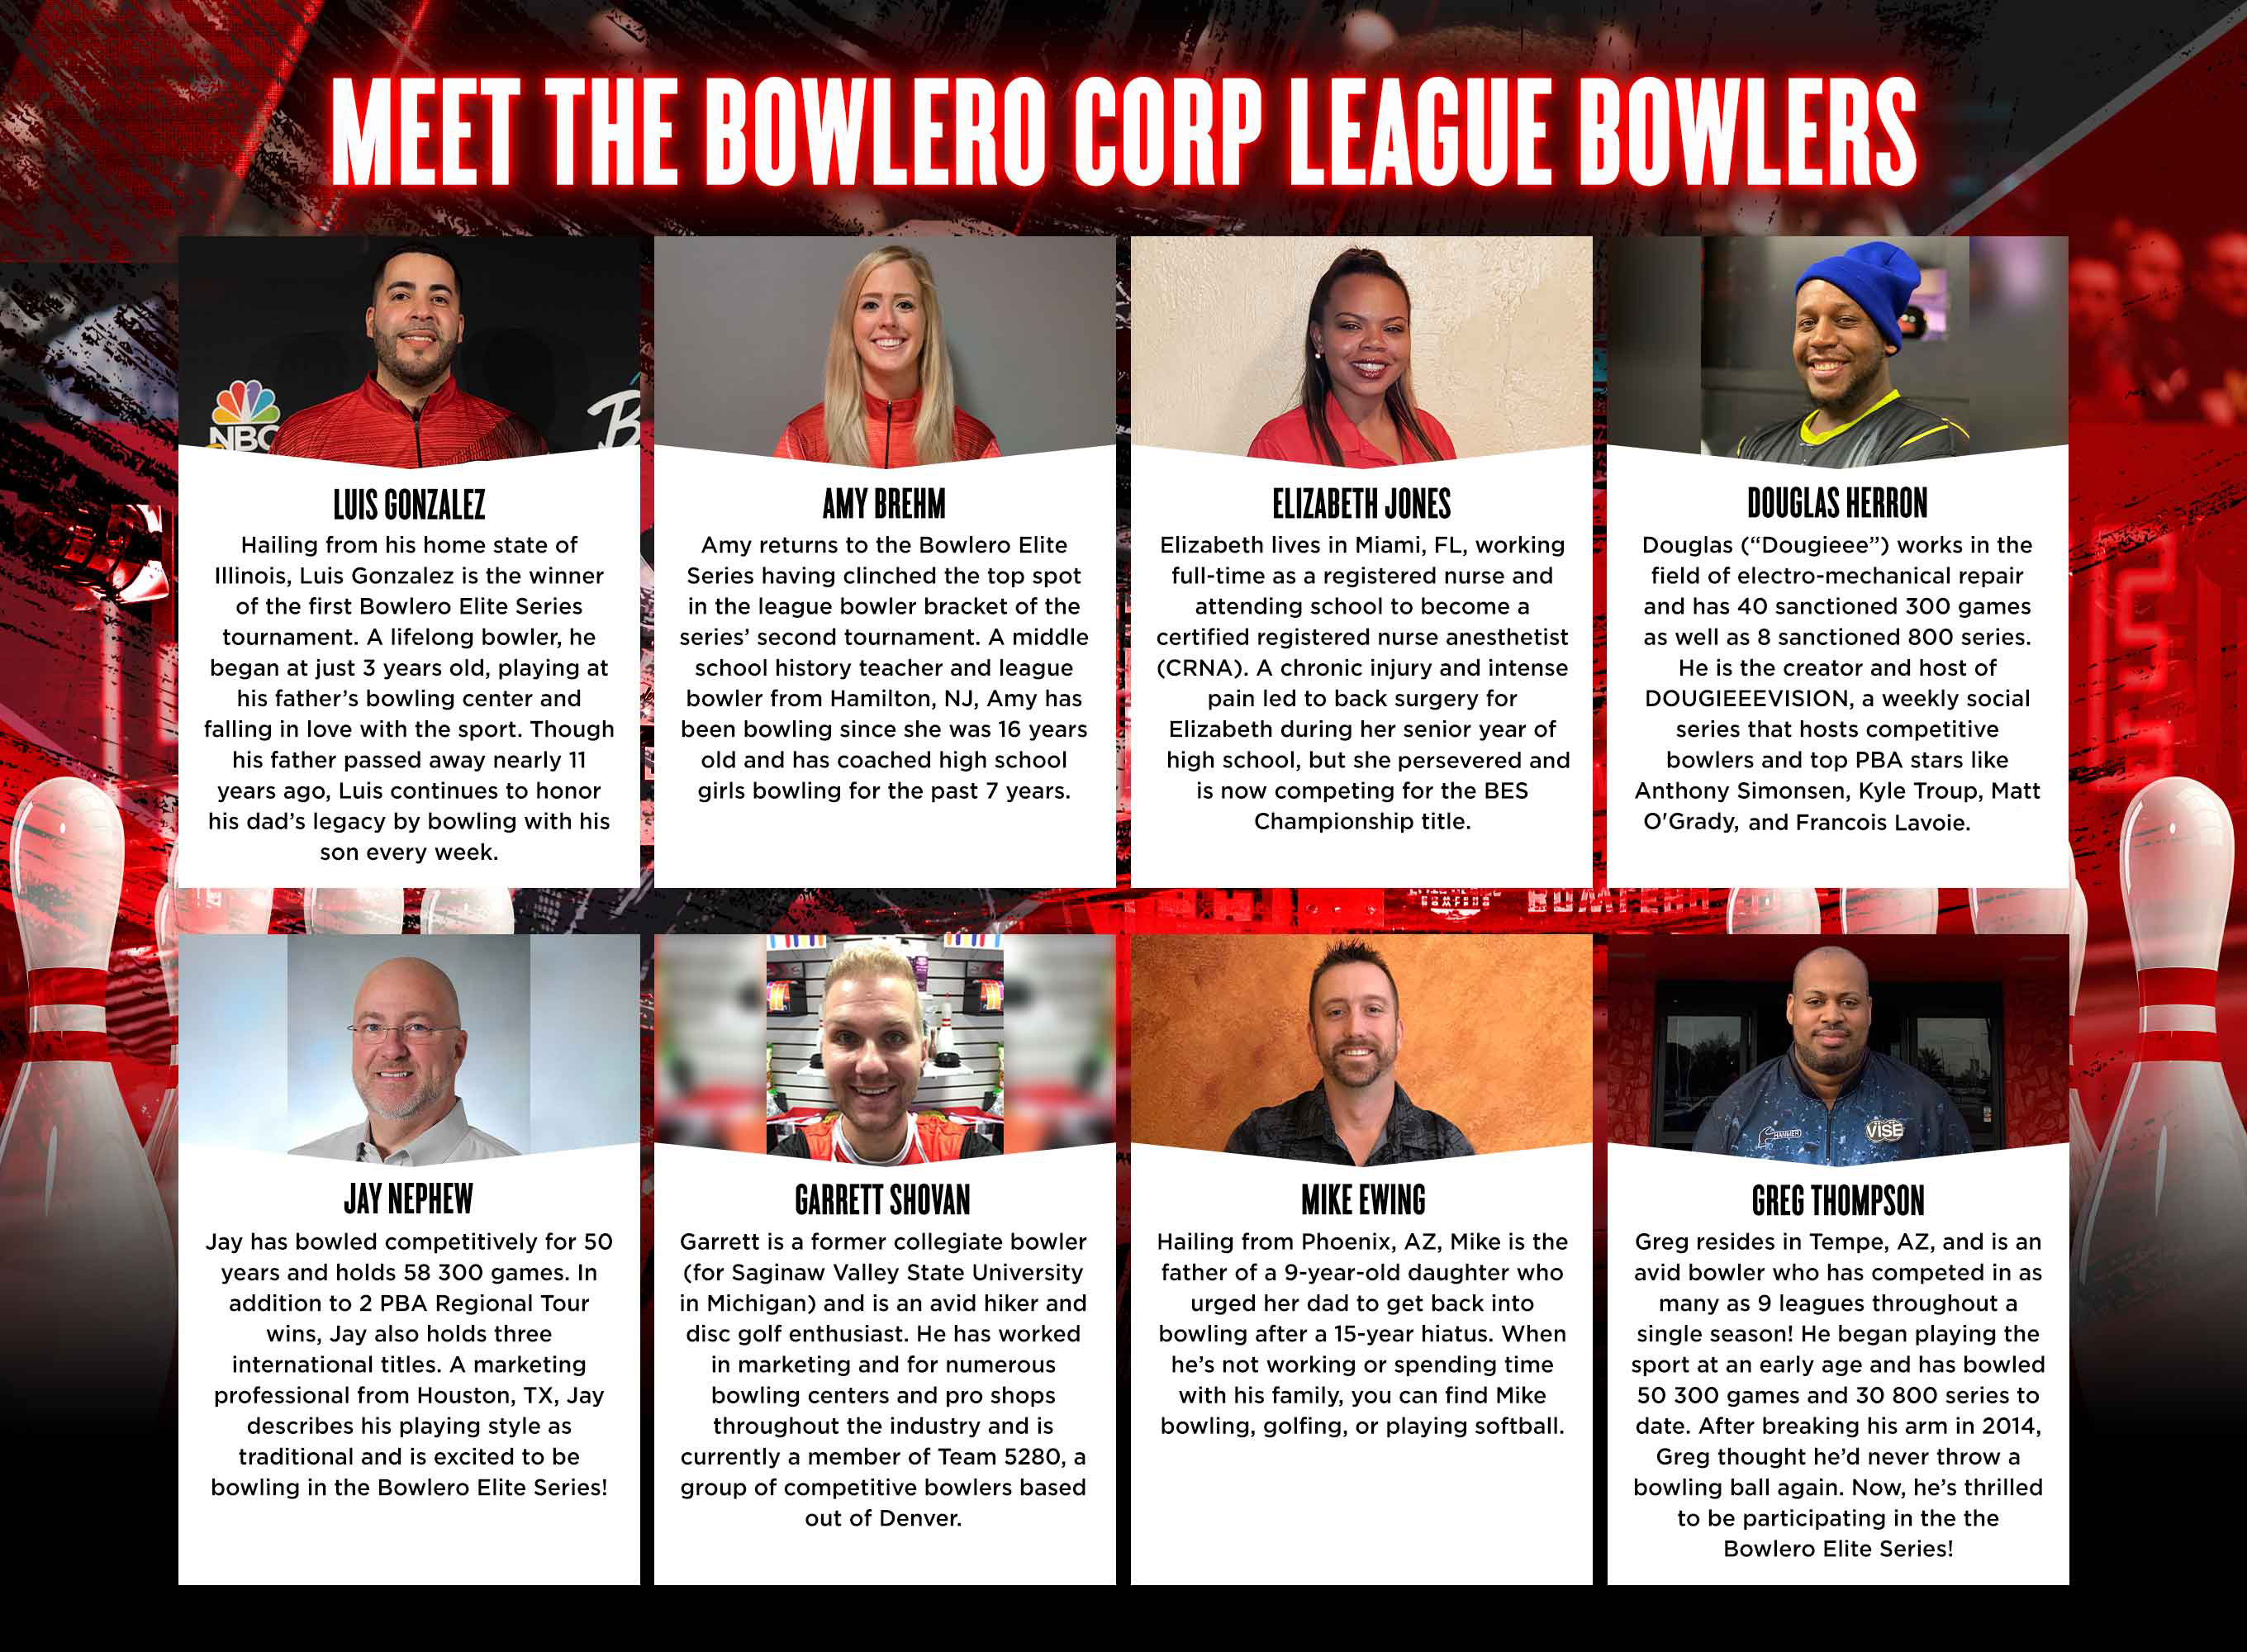 list of bowlero corp league bowlers participating in the bowlero elite series tournament